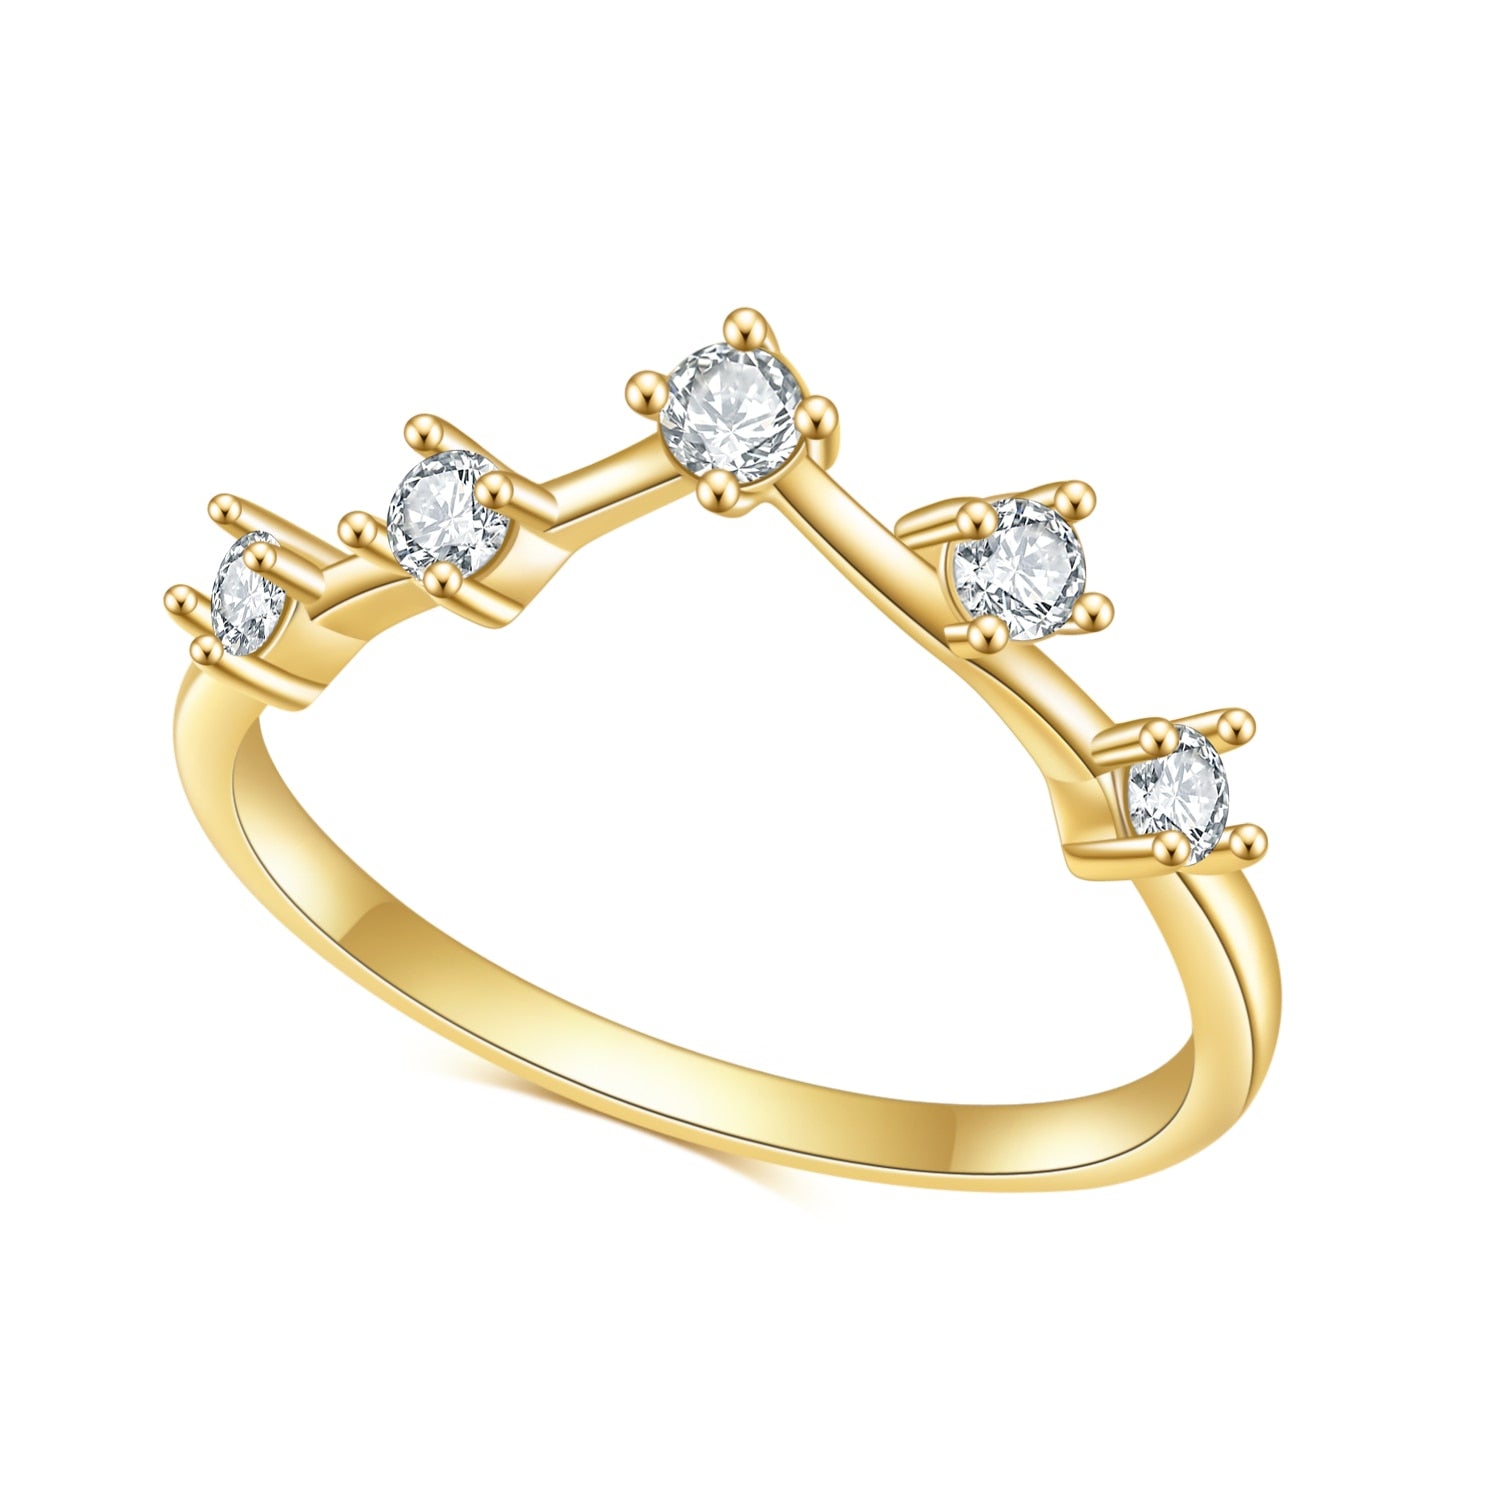 A gold chevron style wedding ring set with 5 small round spaced apart moissanites.